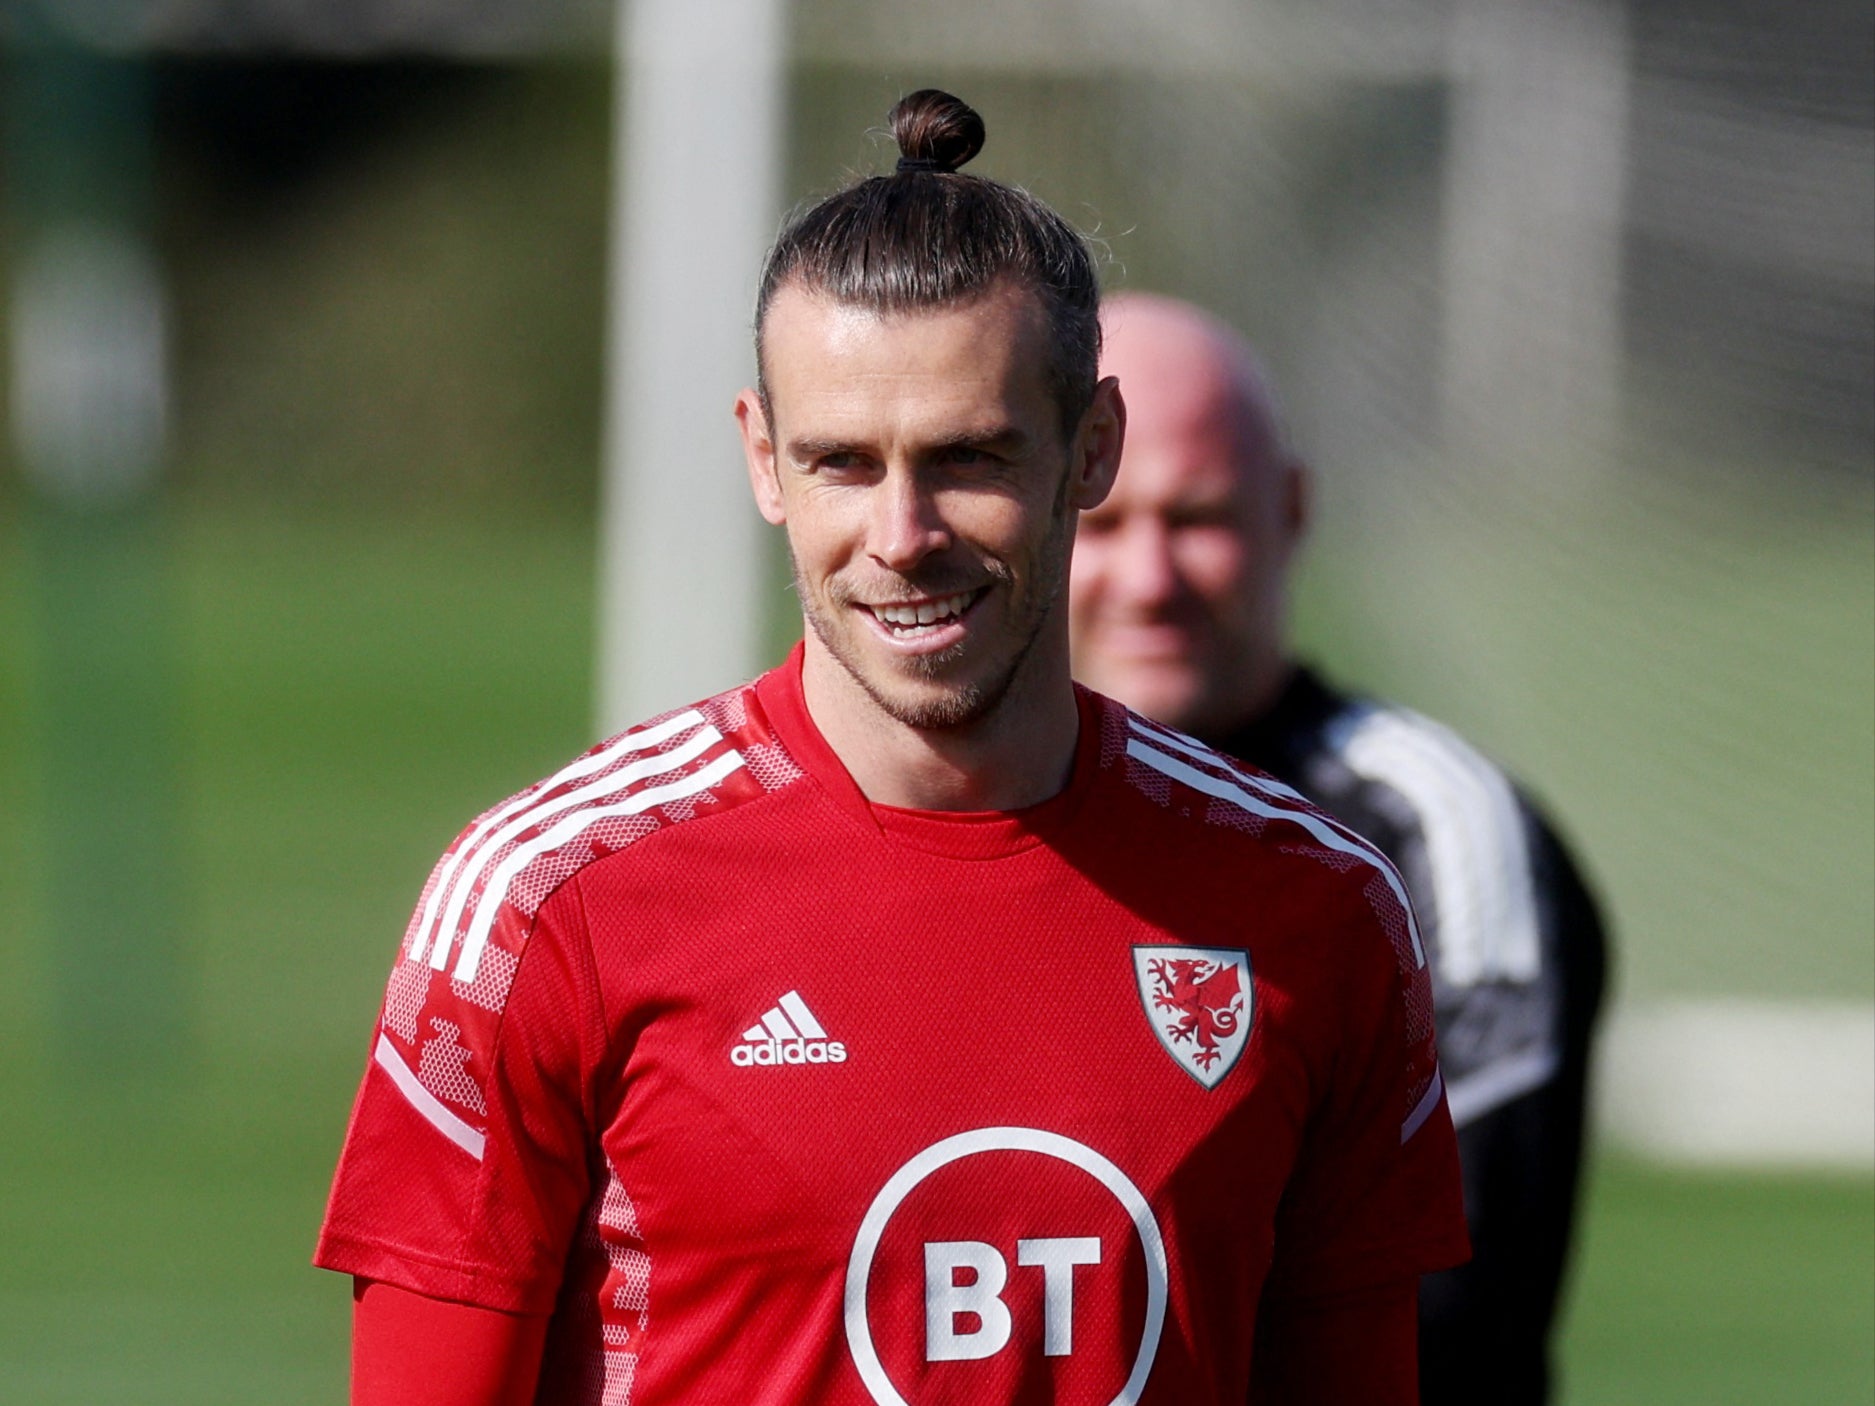 Bale has yet to play 90 minutes for his new club Los Angeles FC